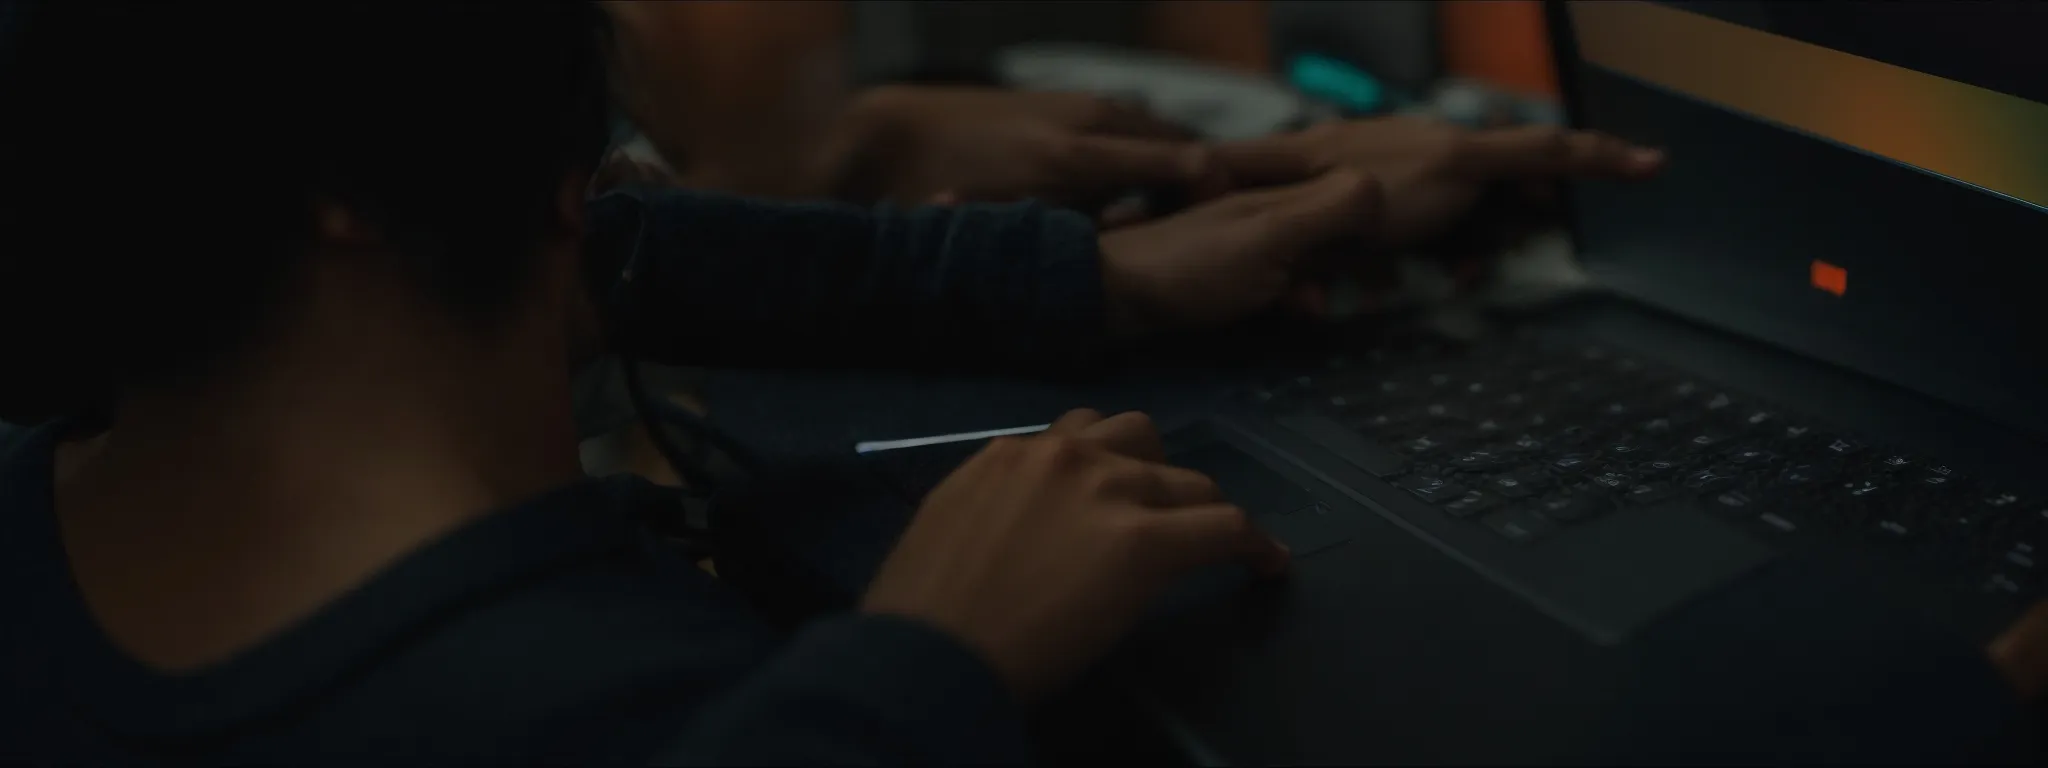 a person swiftly adjusting settings on a computer to optimize website performance.